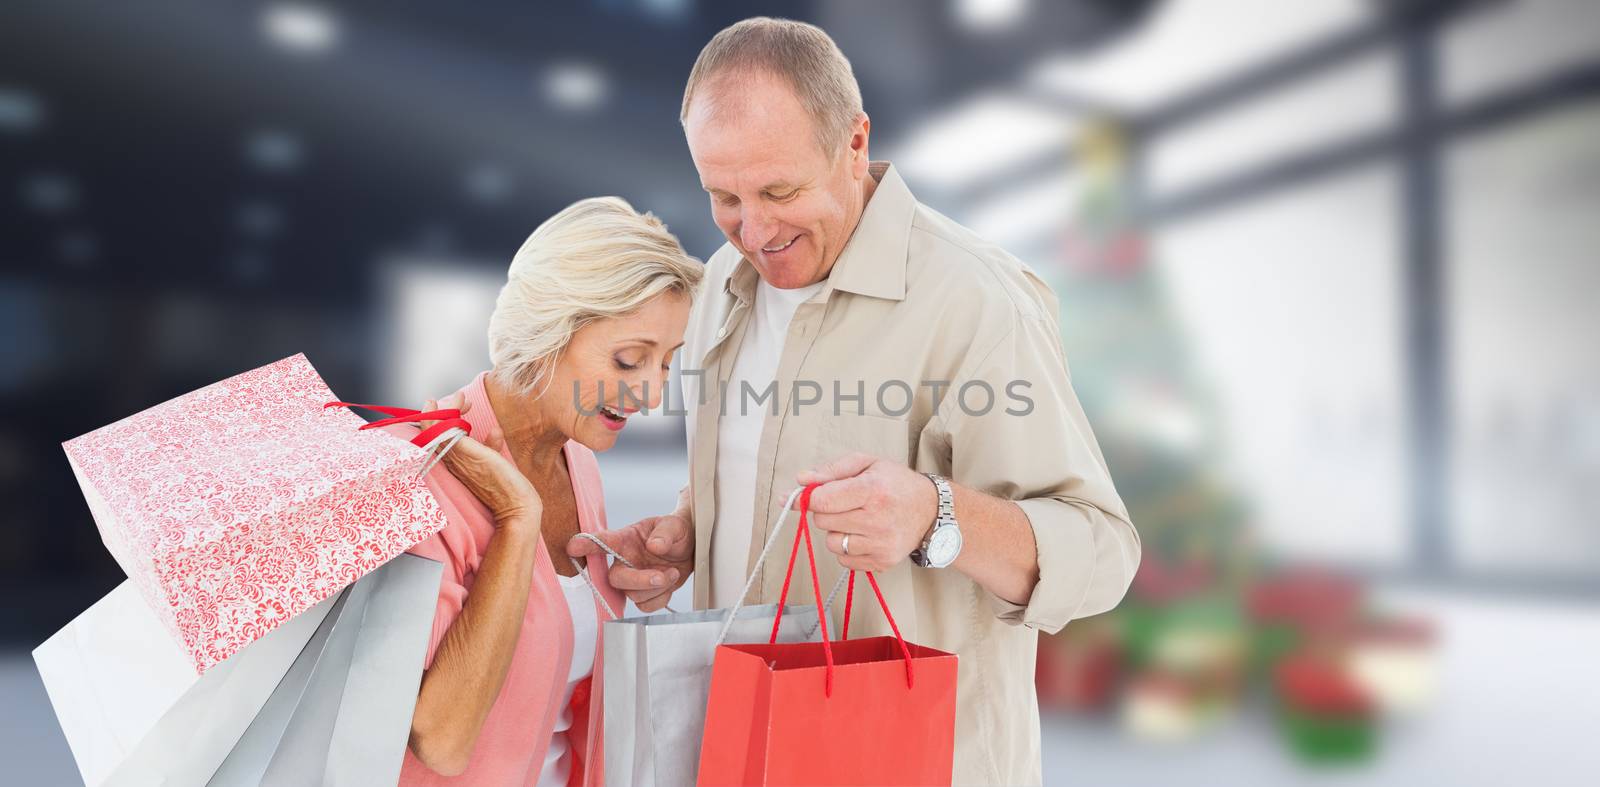 Couple with shopping bags against home with christmas tree